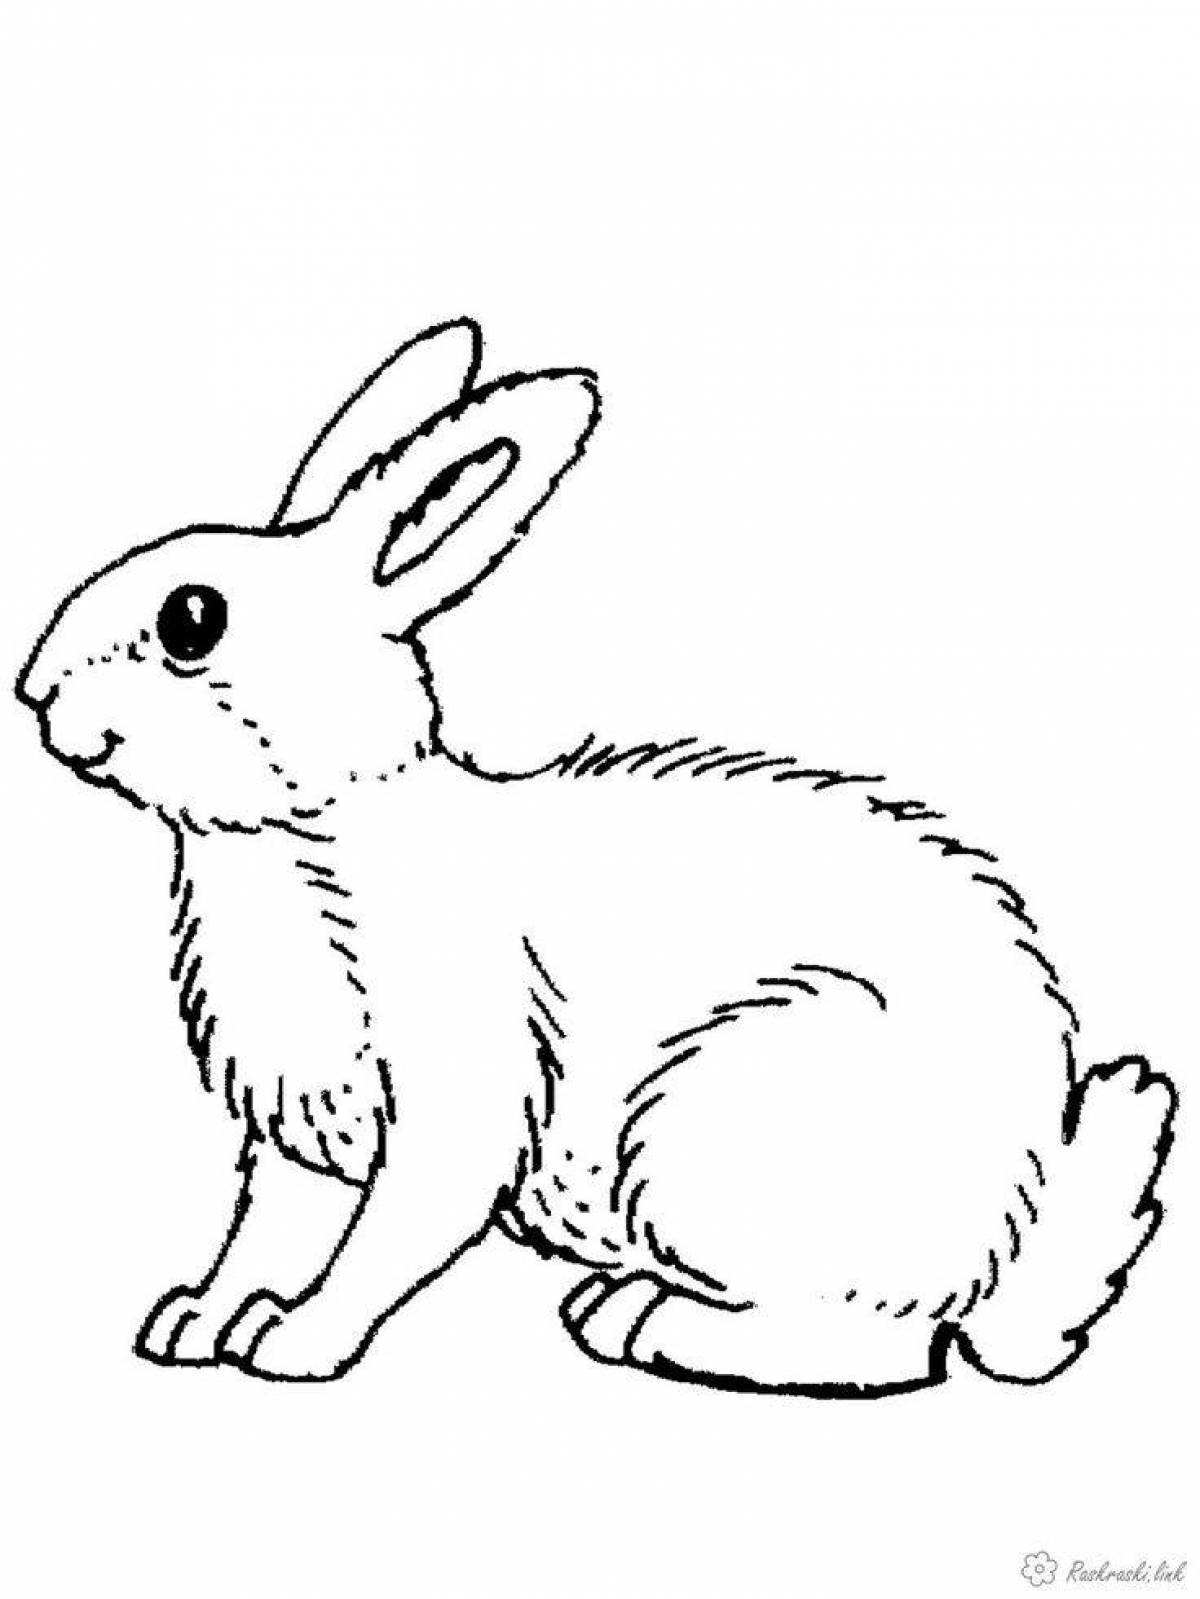 Exciting hare coloring for kids